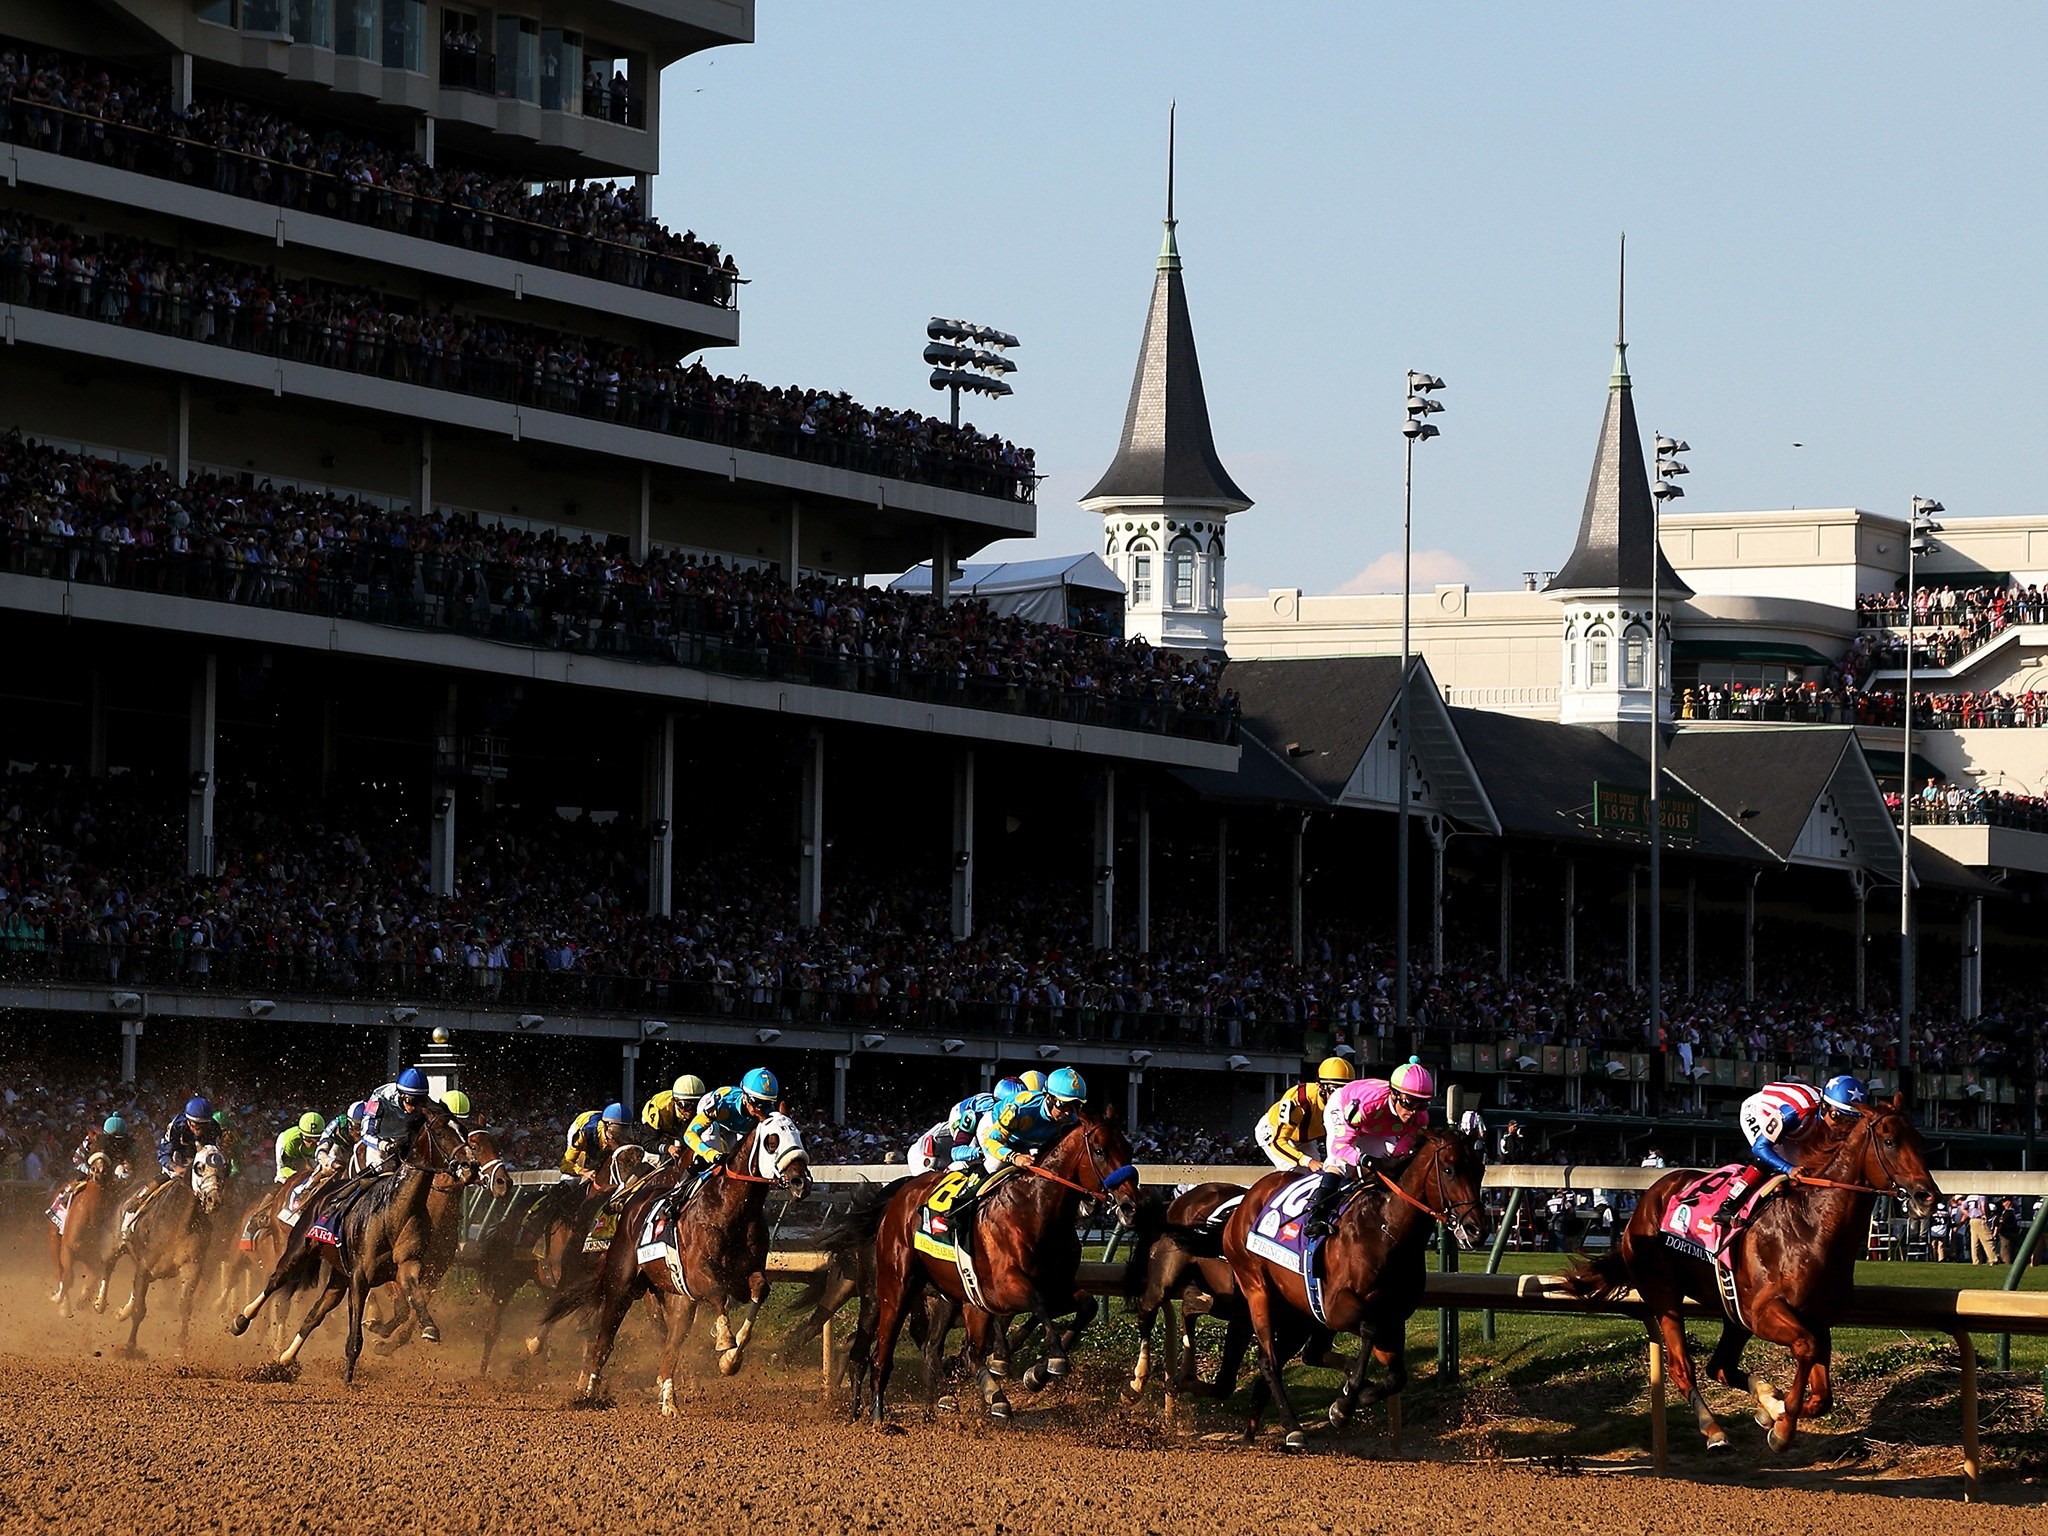 2048x1536 The Second Busiest Time at Churchill Downs Is... Thanksgiving? - CondÃ© Nast  Traveler